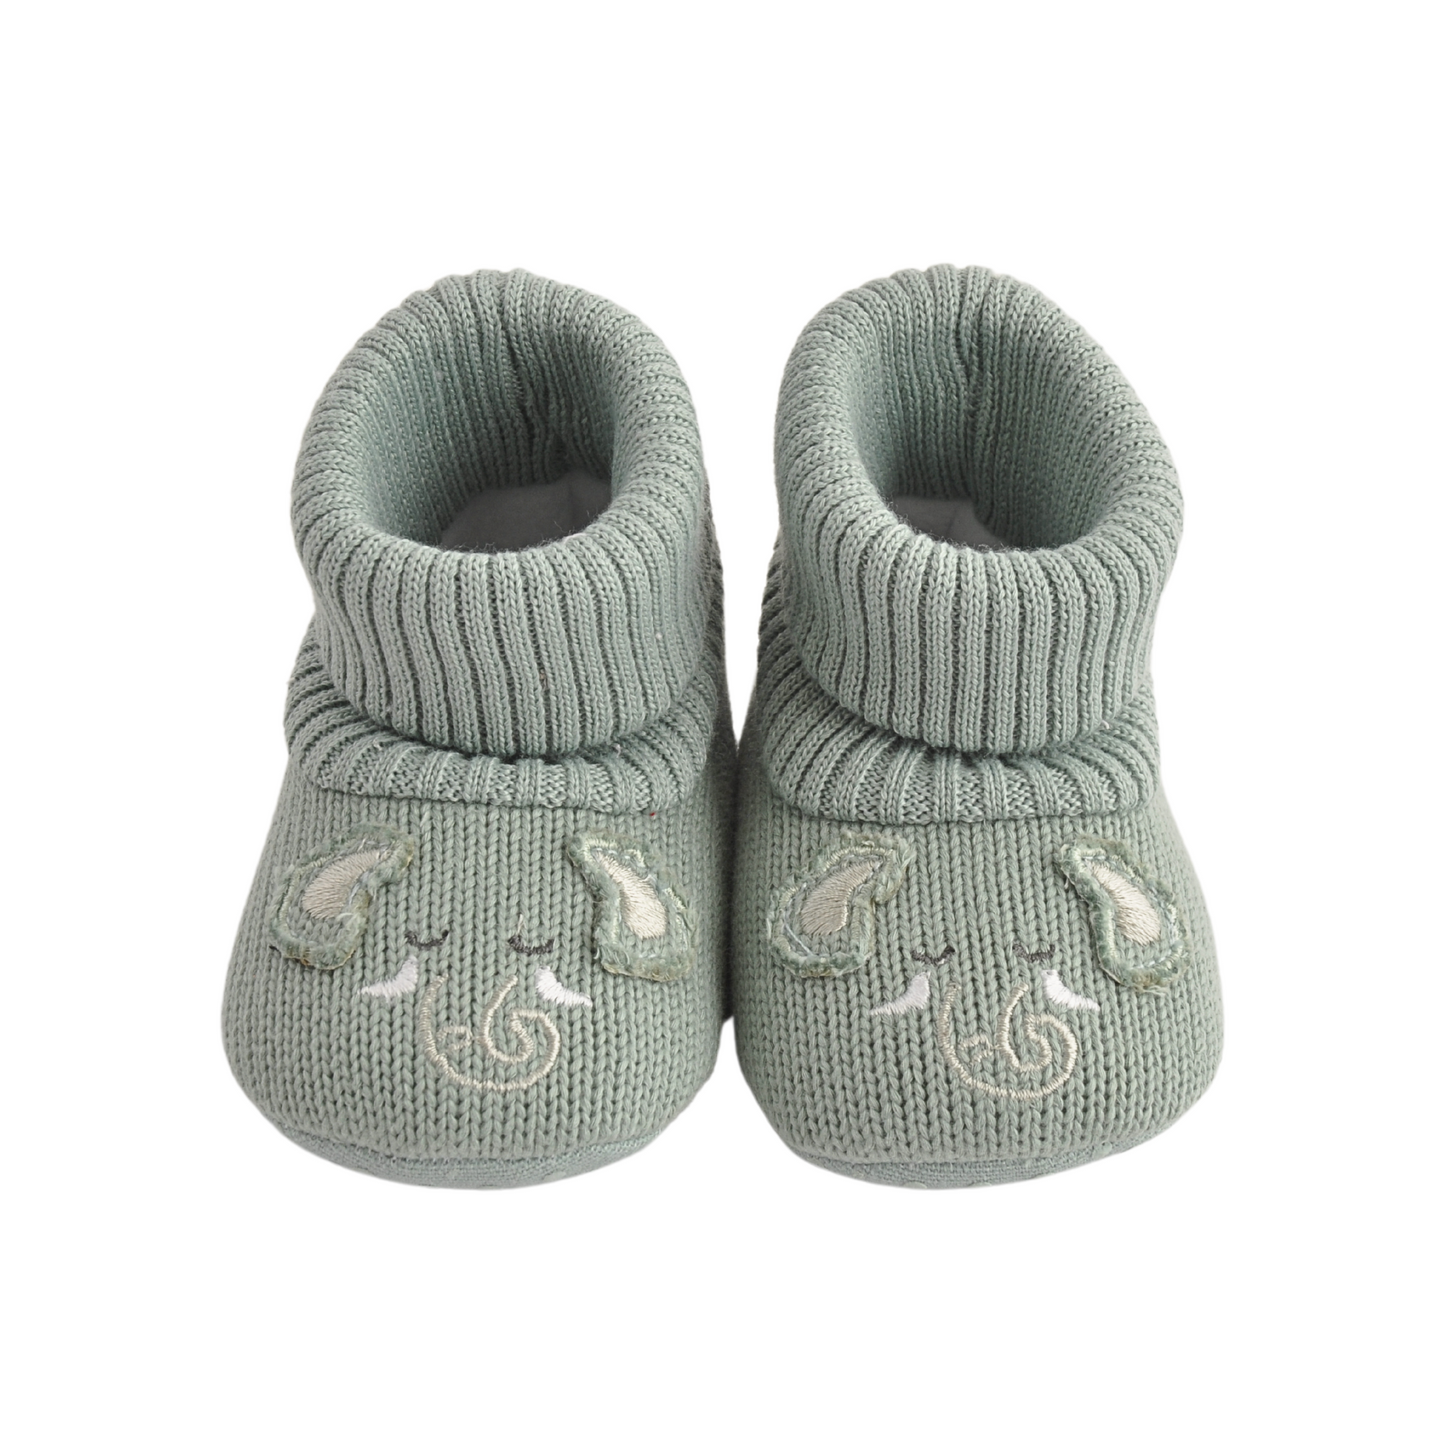 Baby Novelty Knitted Booties 0-6M - Elephant